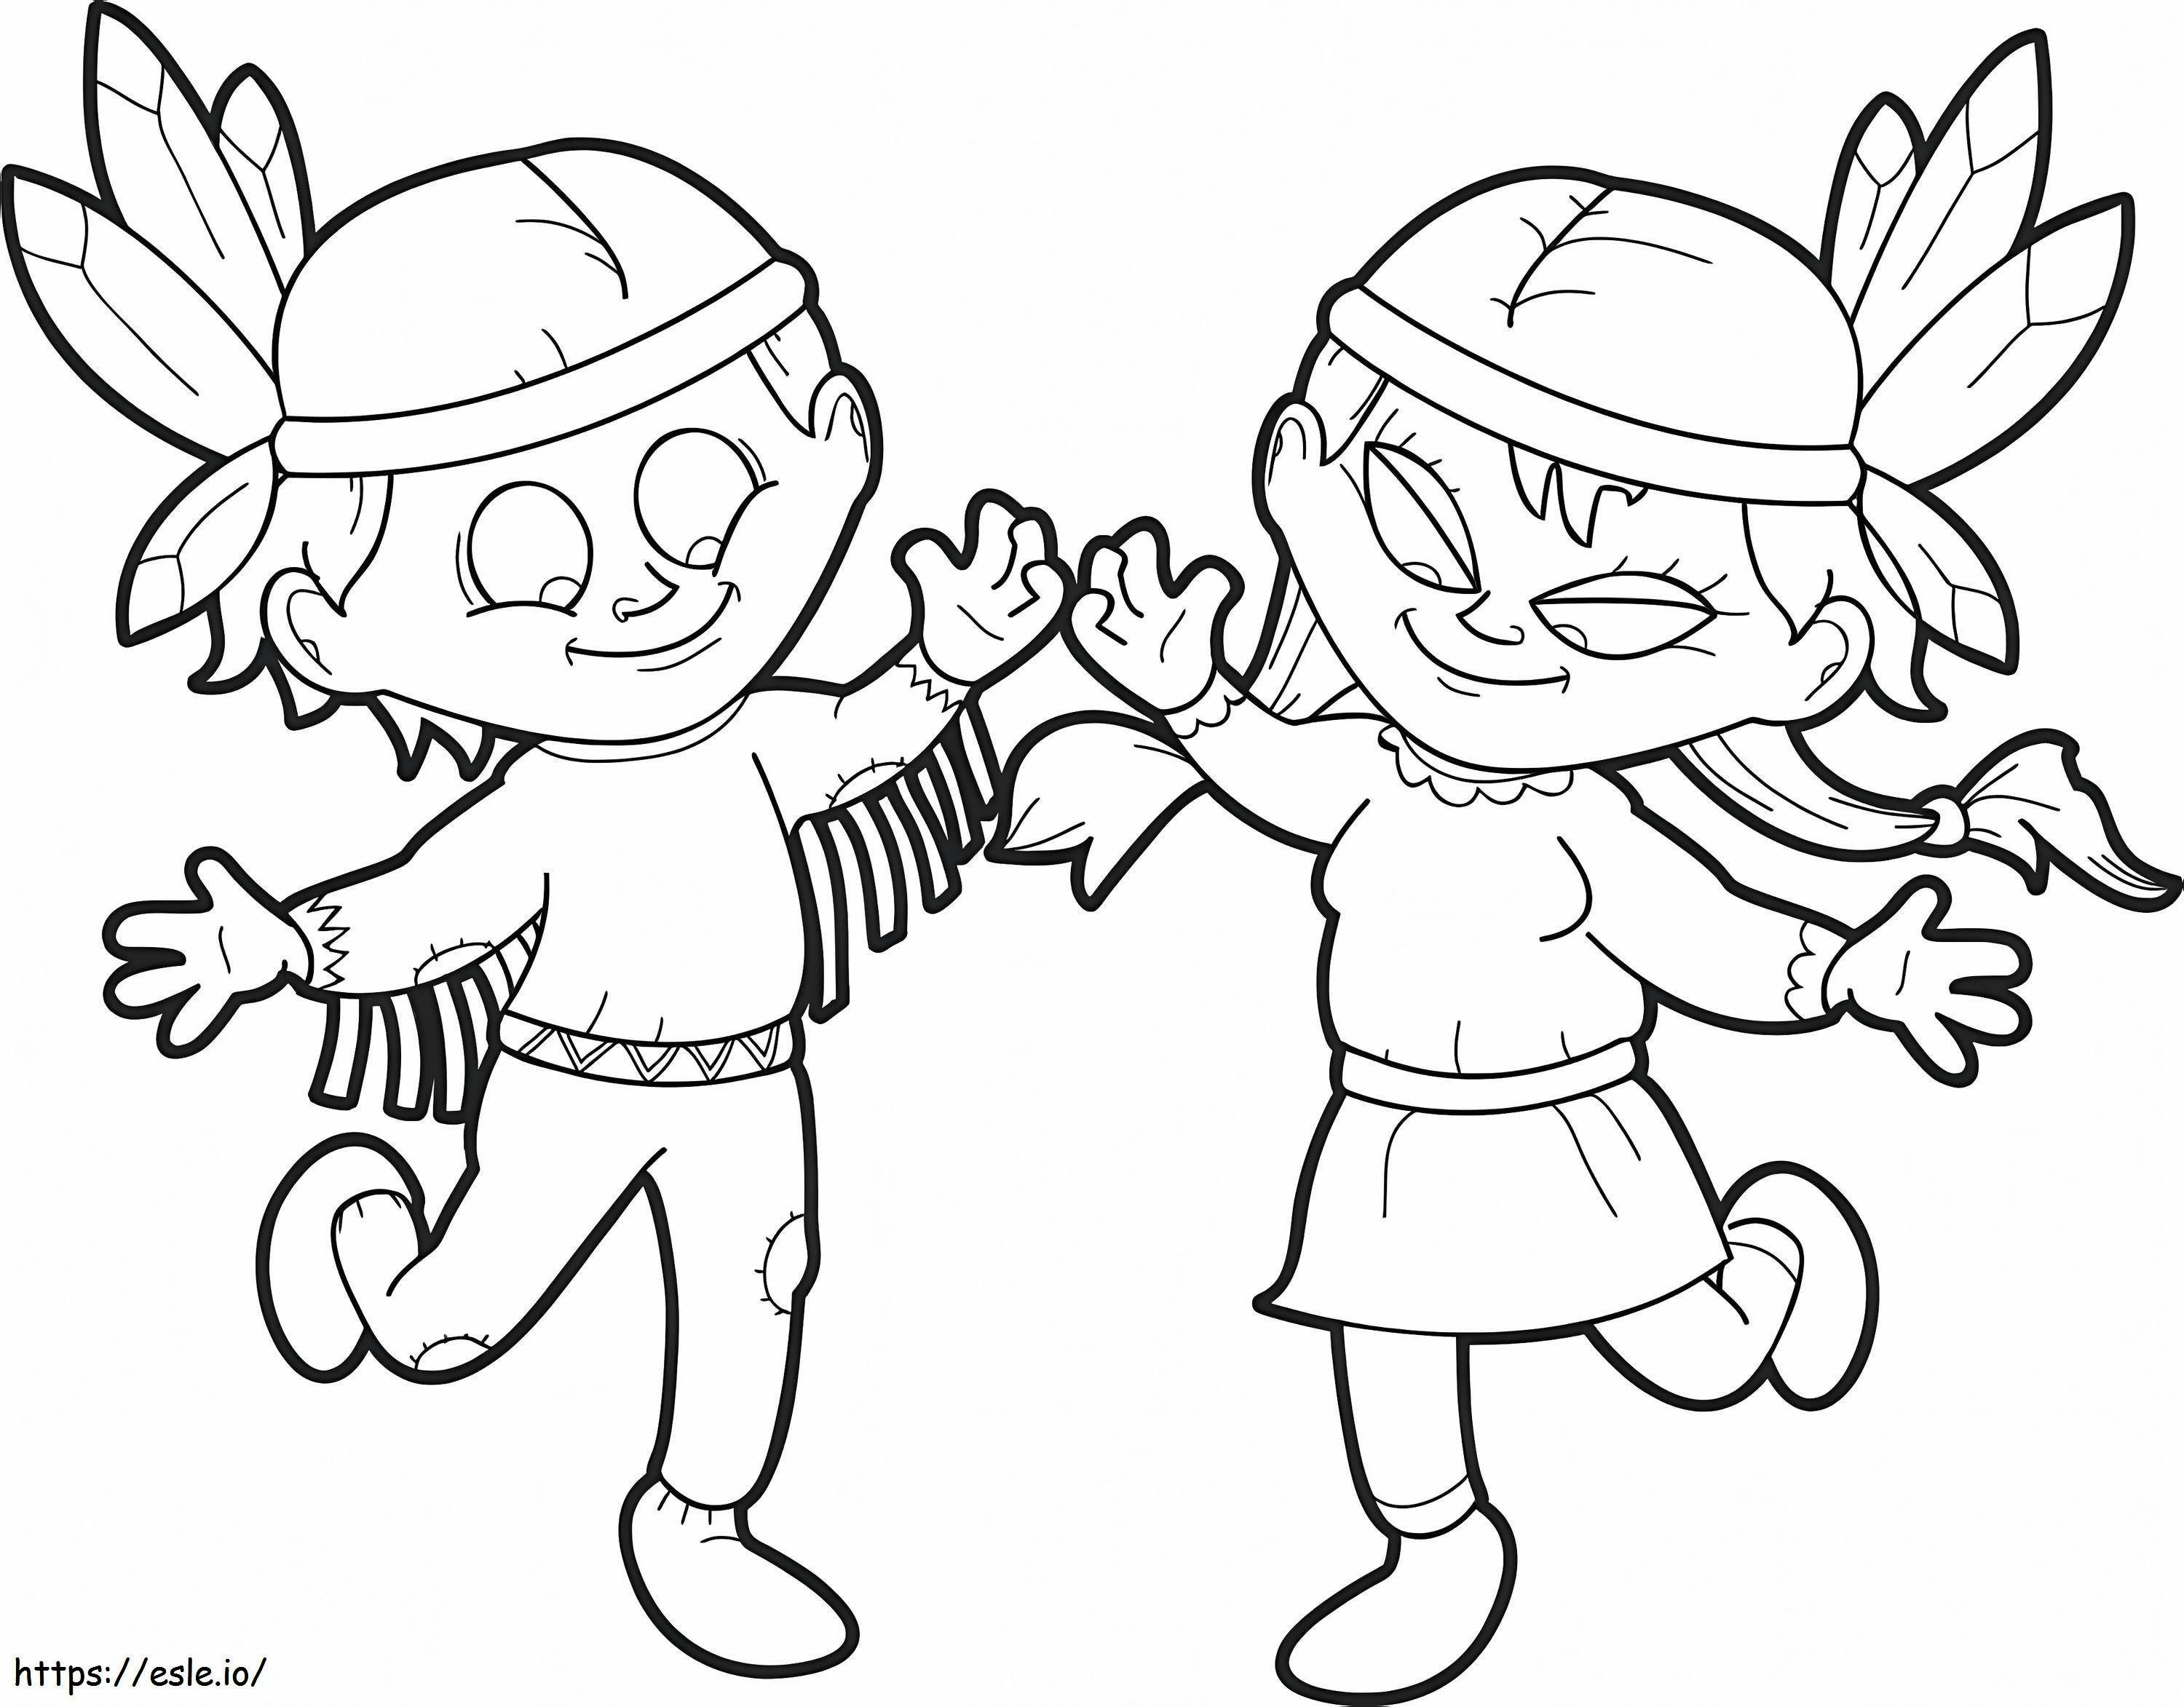 Native Americans Dancing coloring page